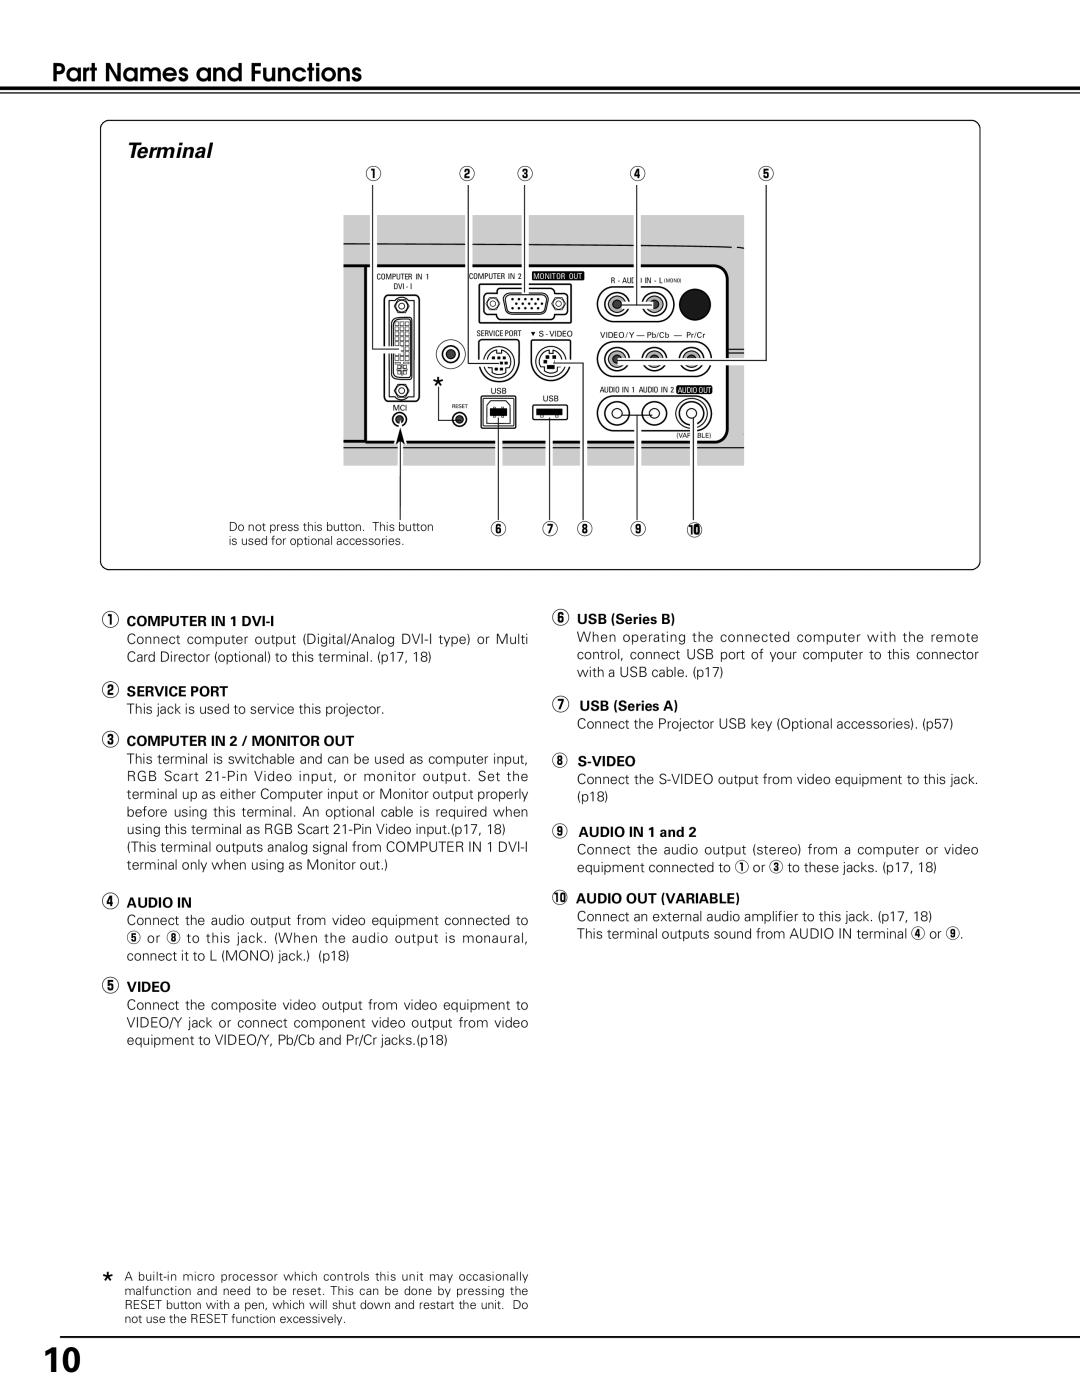 Black Box LC-XE10 instruction manual Part Names and Functions, Terminal, y u i o !0 